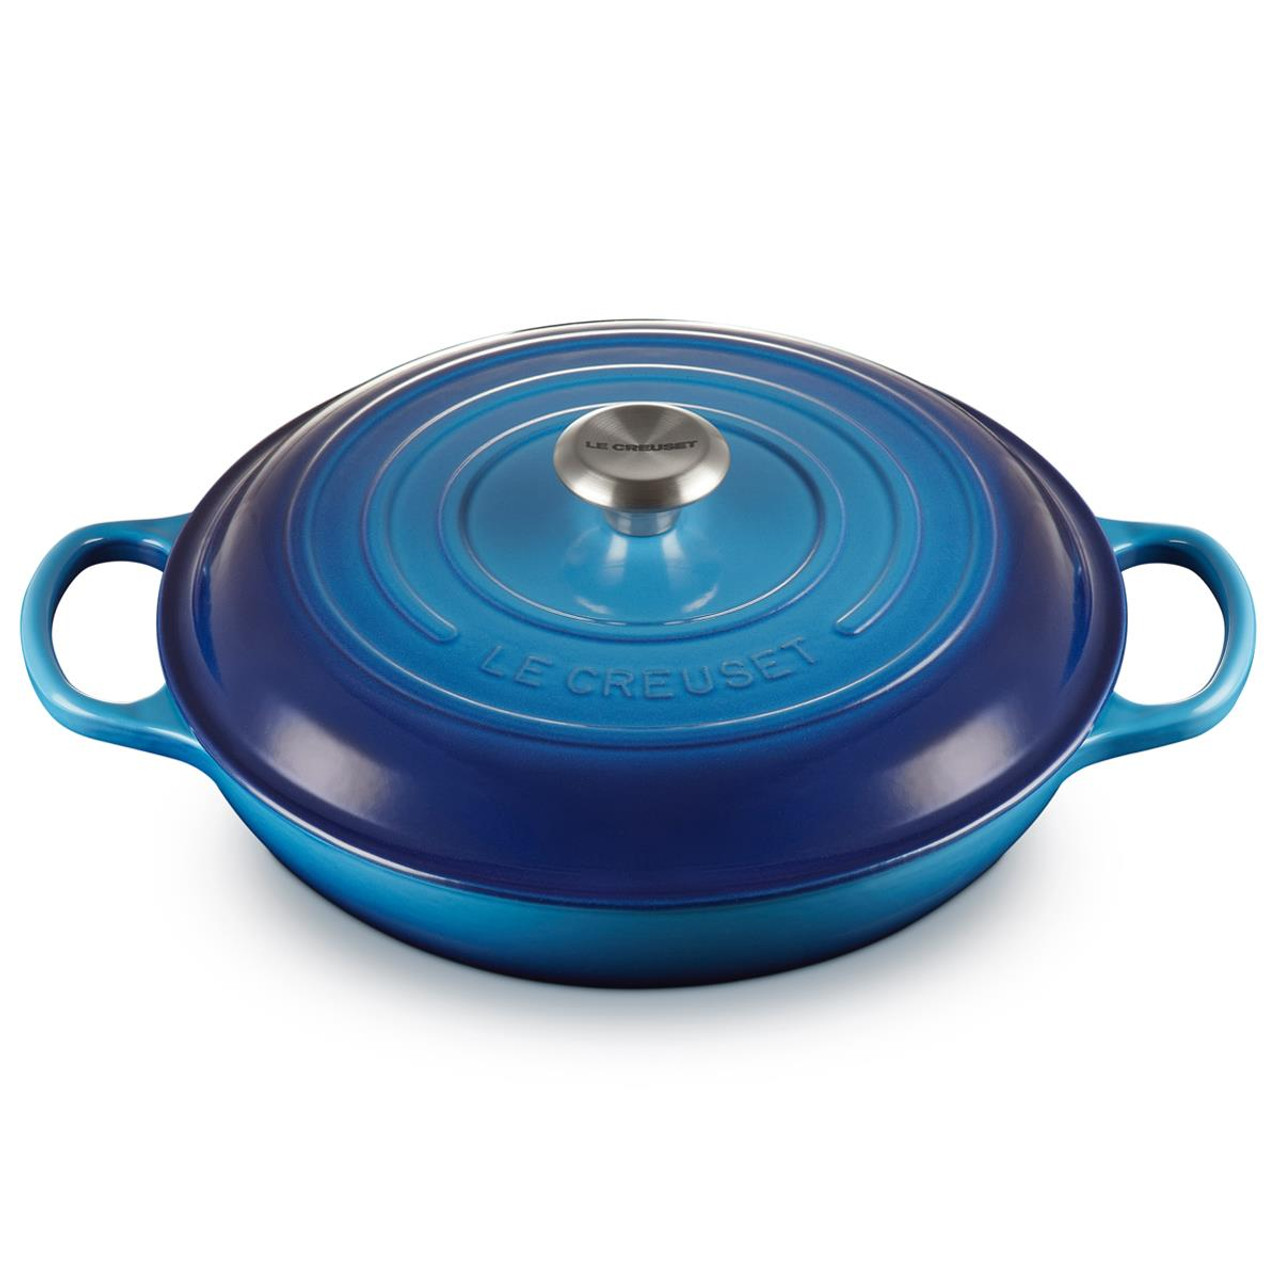 What is the 30cm Le Creuset shallow casserole dish?